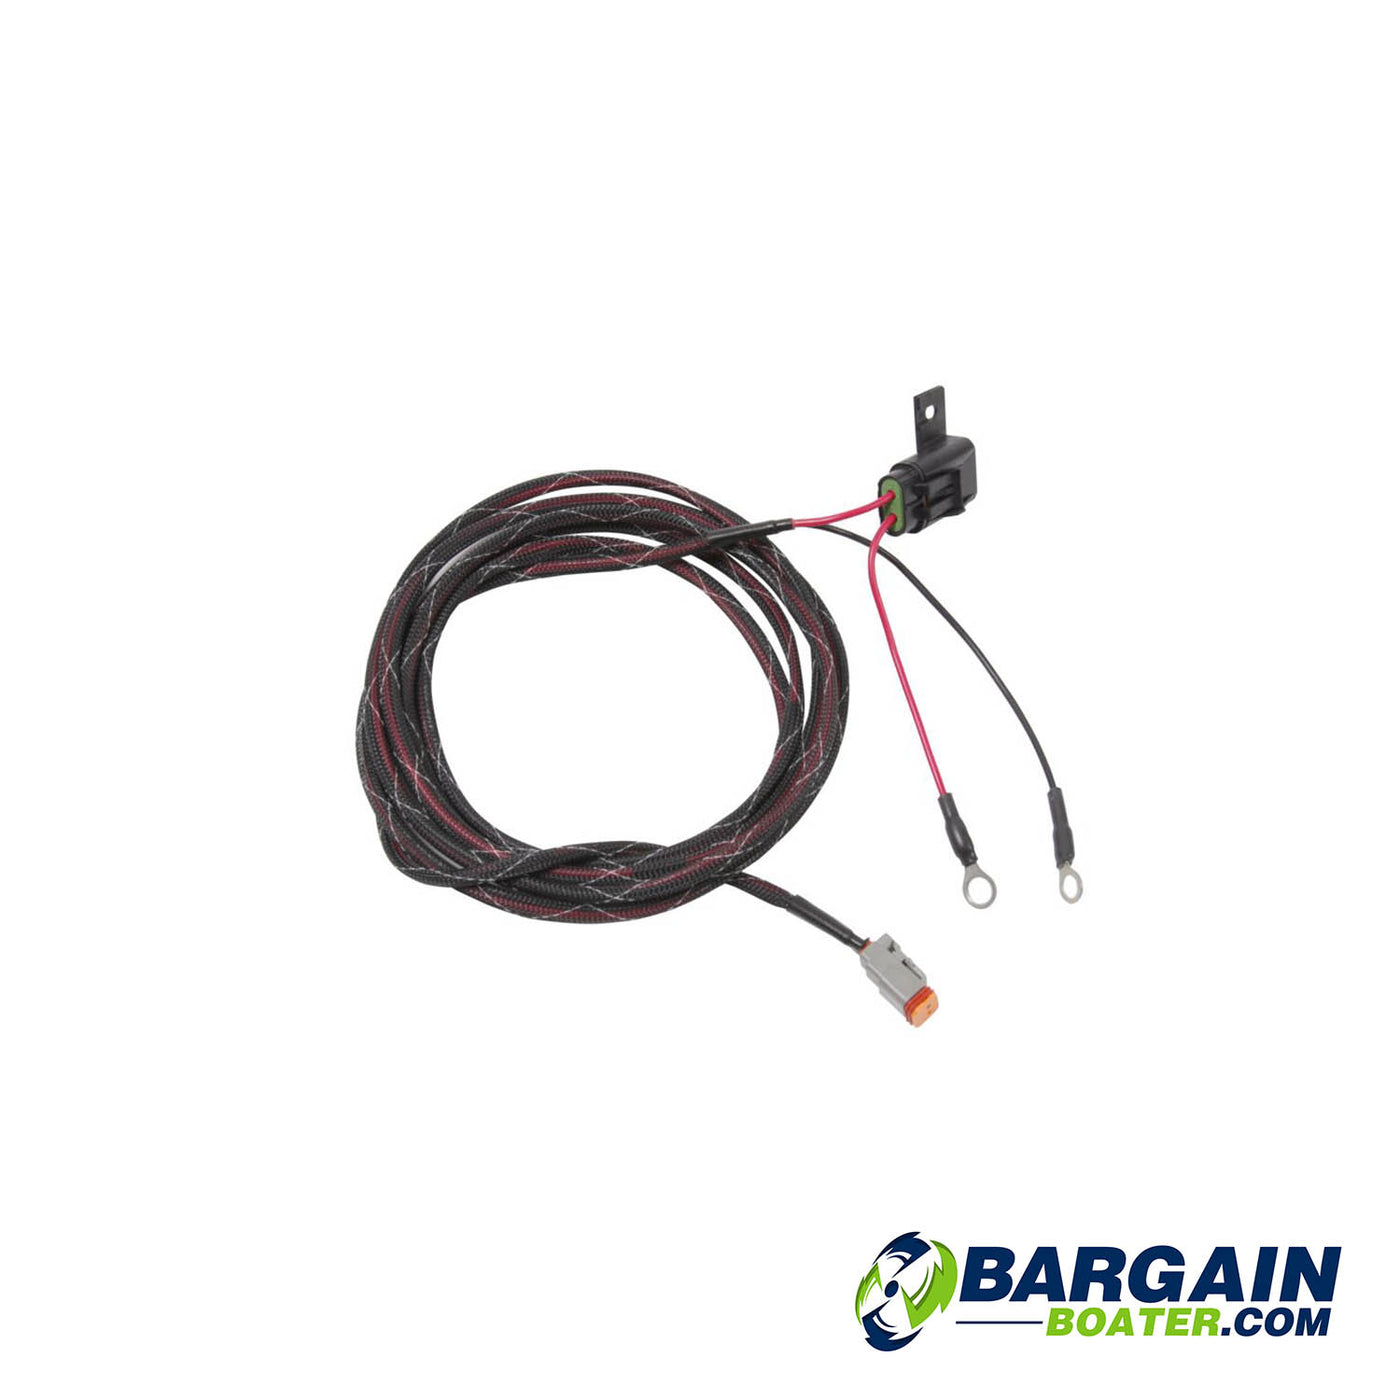 764921 - Evinrude Battery Power Cable